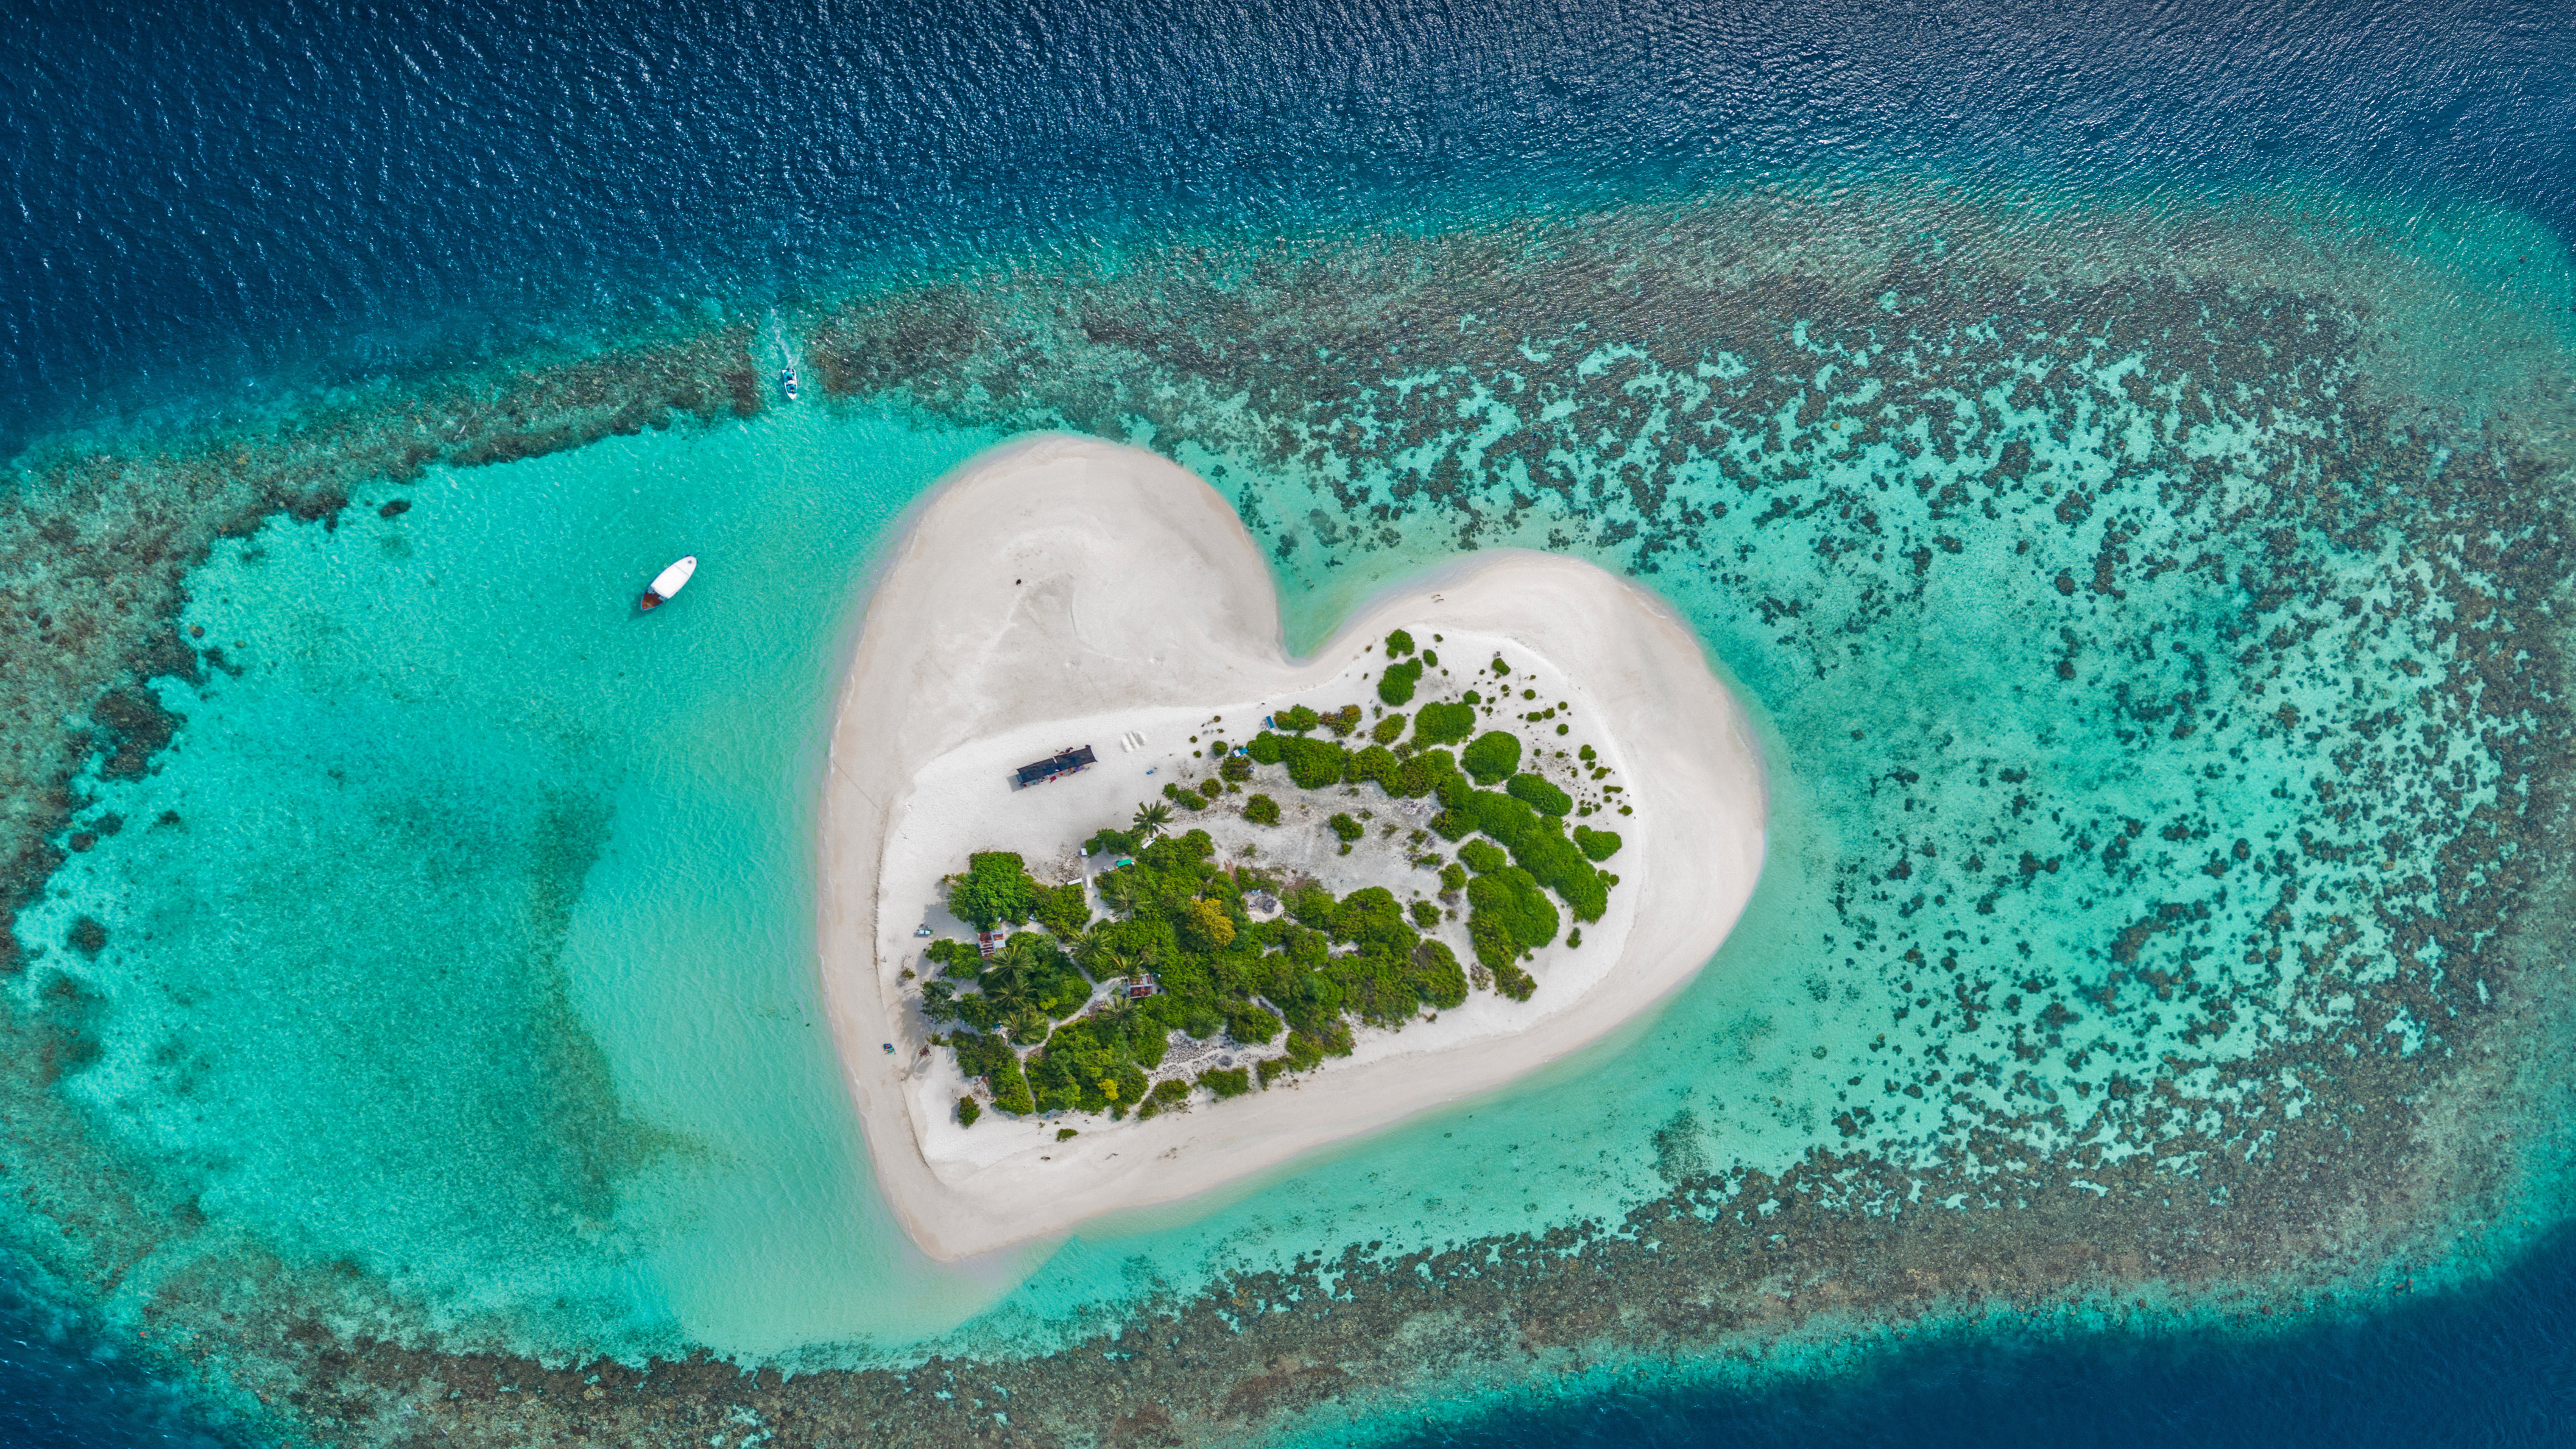 Heart-shaped island with sandy beach, offshore coral reef, Indian Ocean, Maldives by Willyam Bradberry